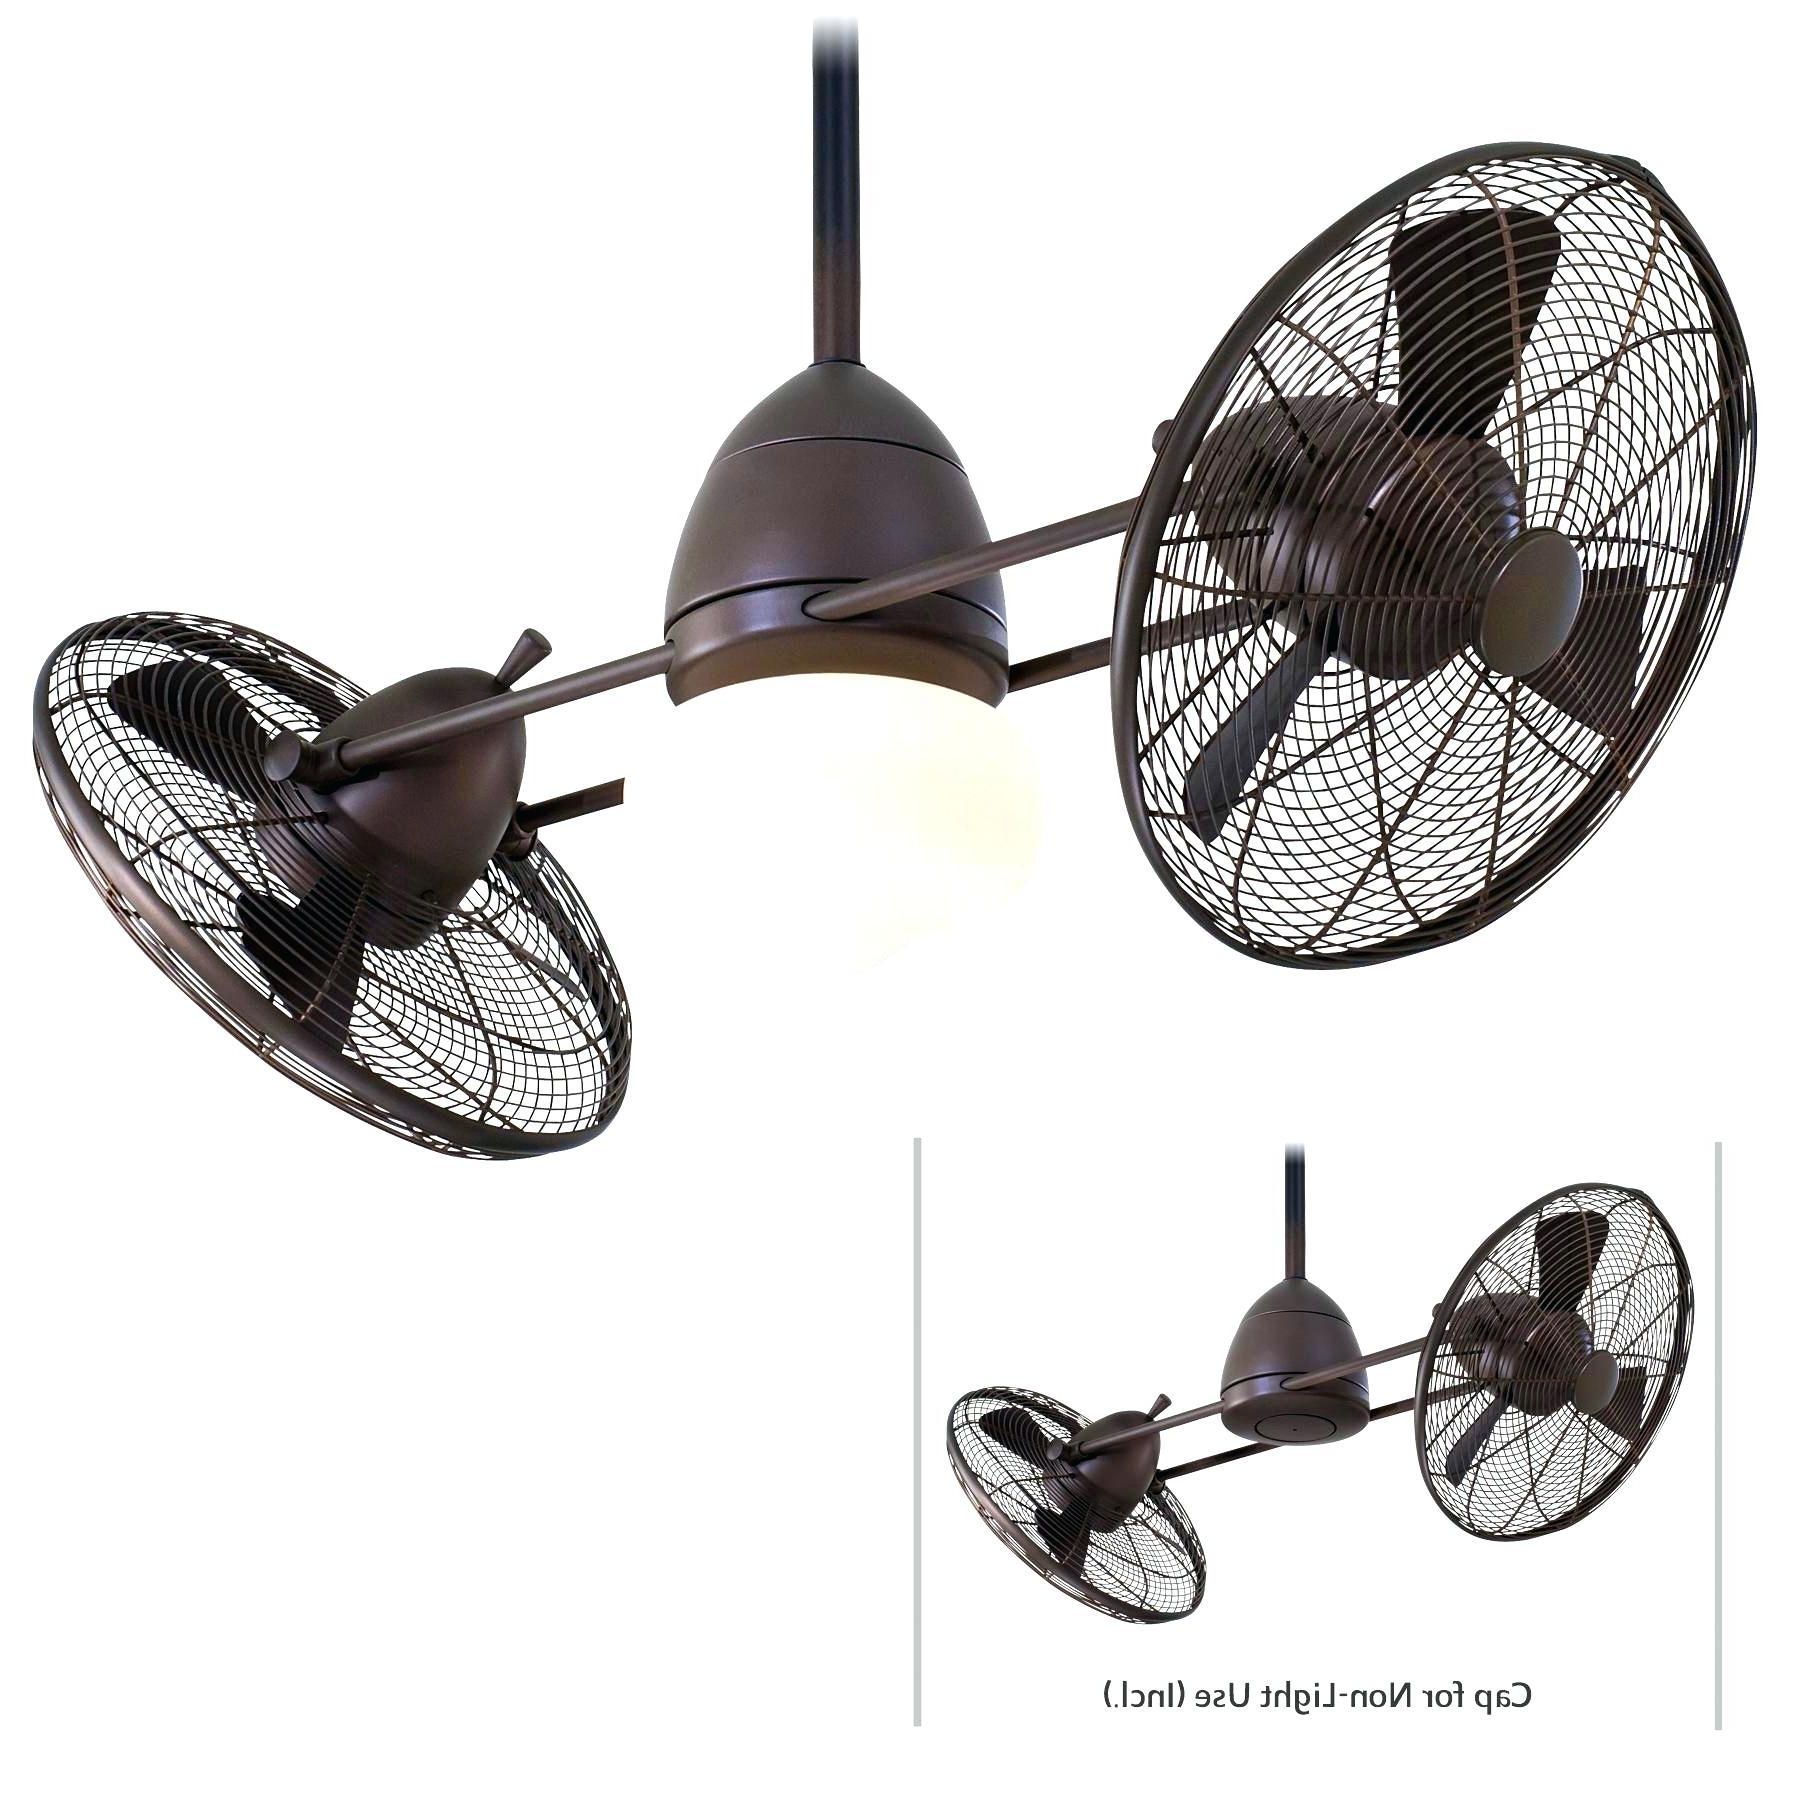 Fashionable Dual Outdoor Ceiling Fans With Lights With Regard To Antique Troposair Ninja Ceiling Fan And Brushed Nickel Ceiling Fans (View 12 of 20)